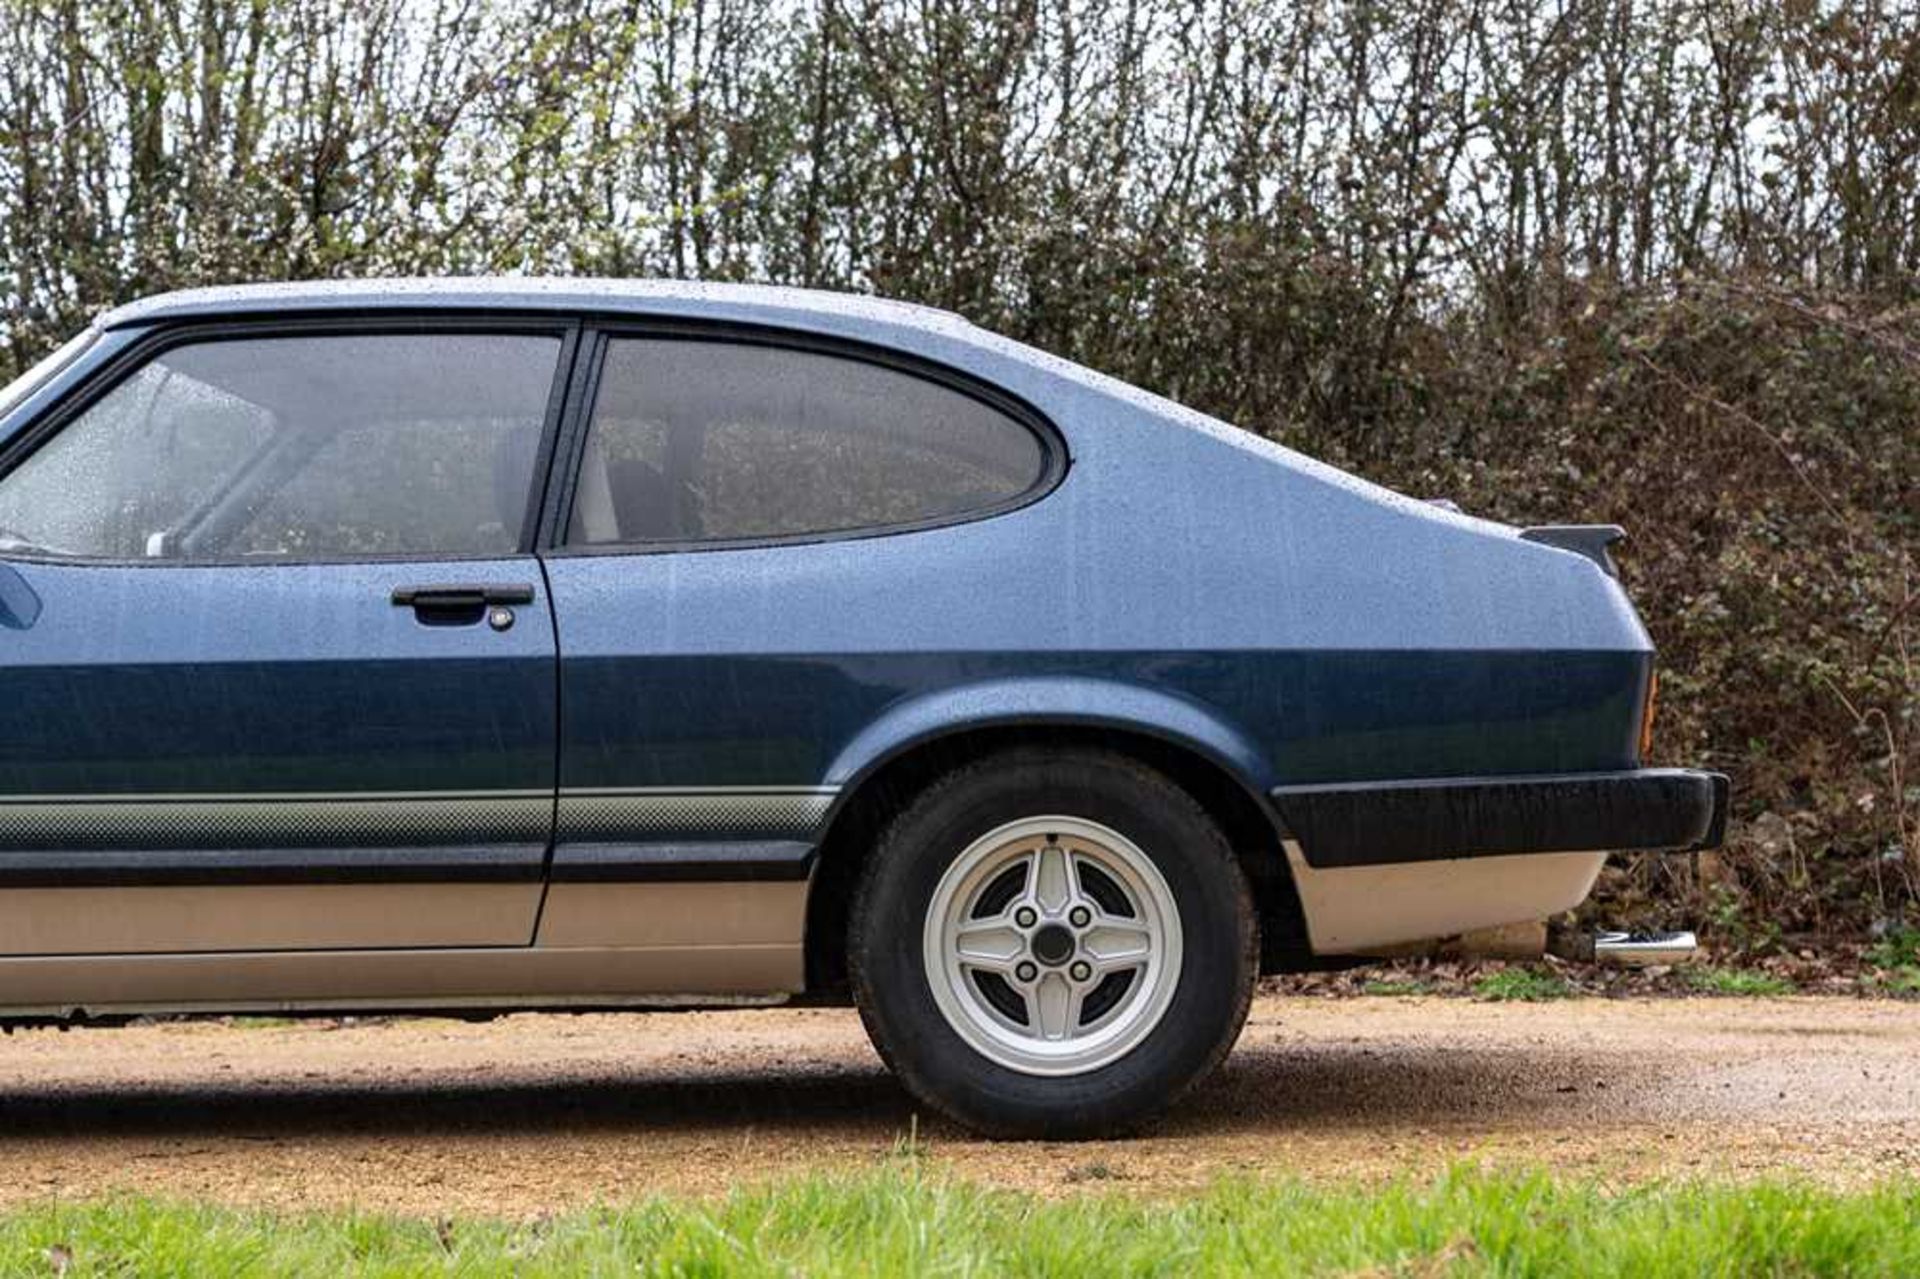 1985 Ford Capri Laser 2.0 Litre Warranted 55,300 miles from new - Image 11 of 67